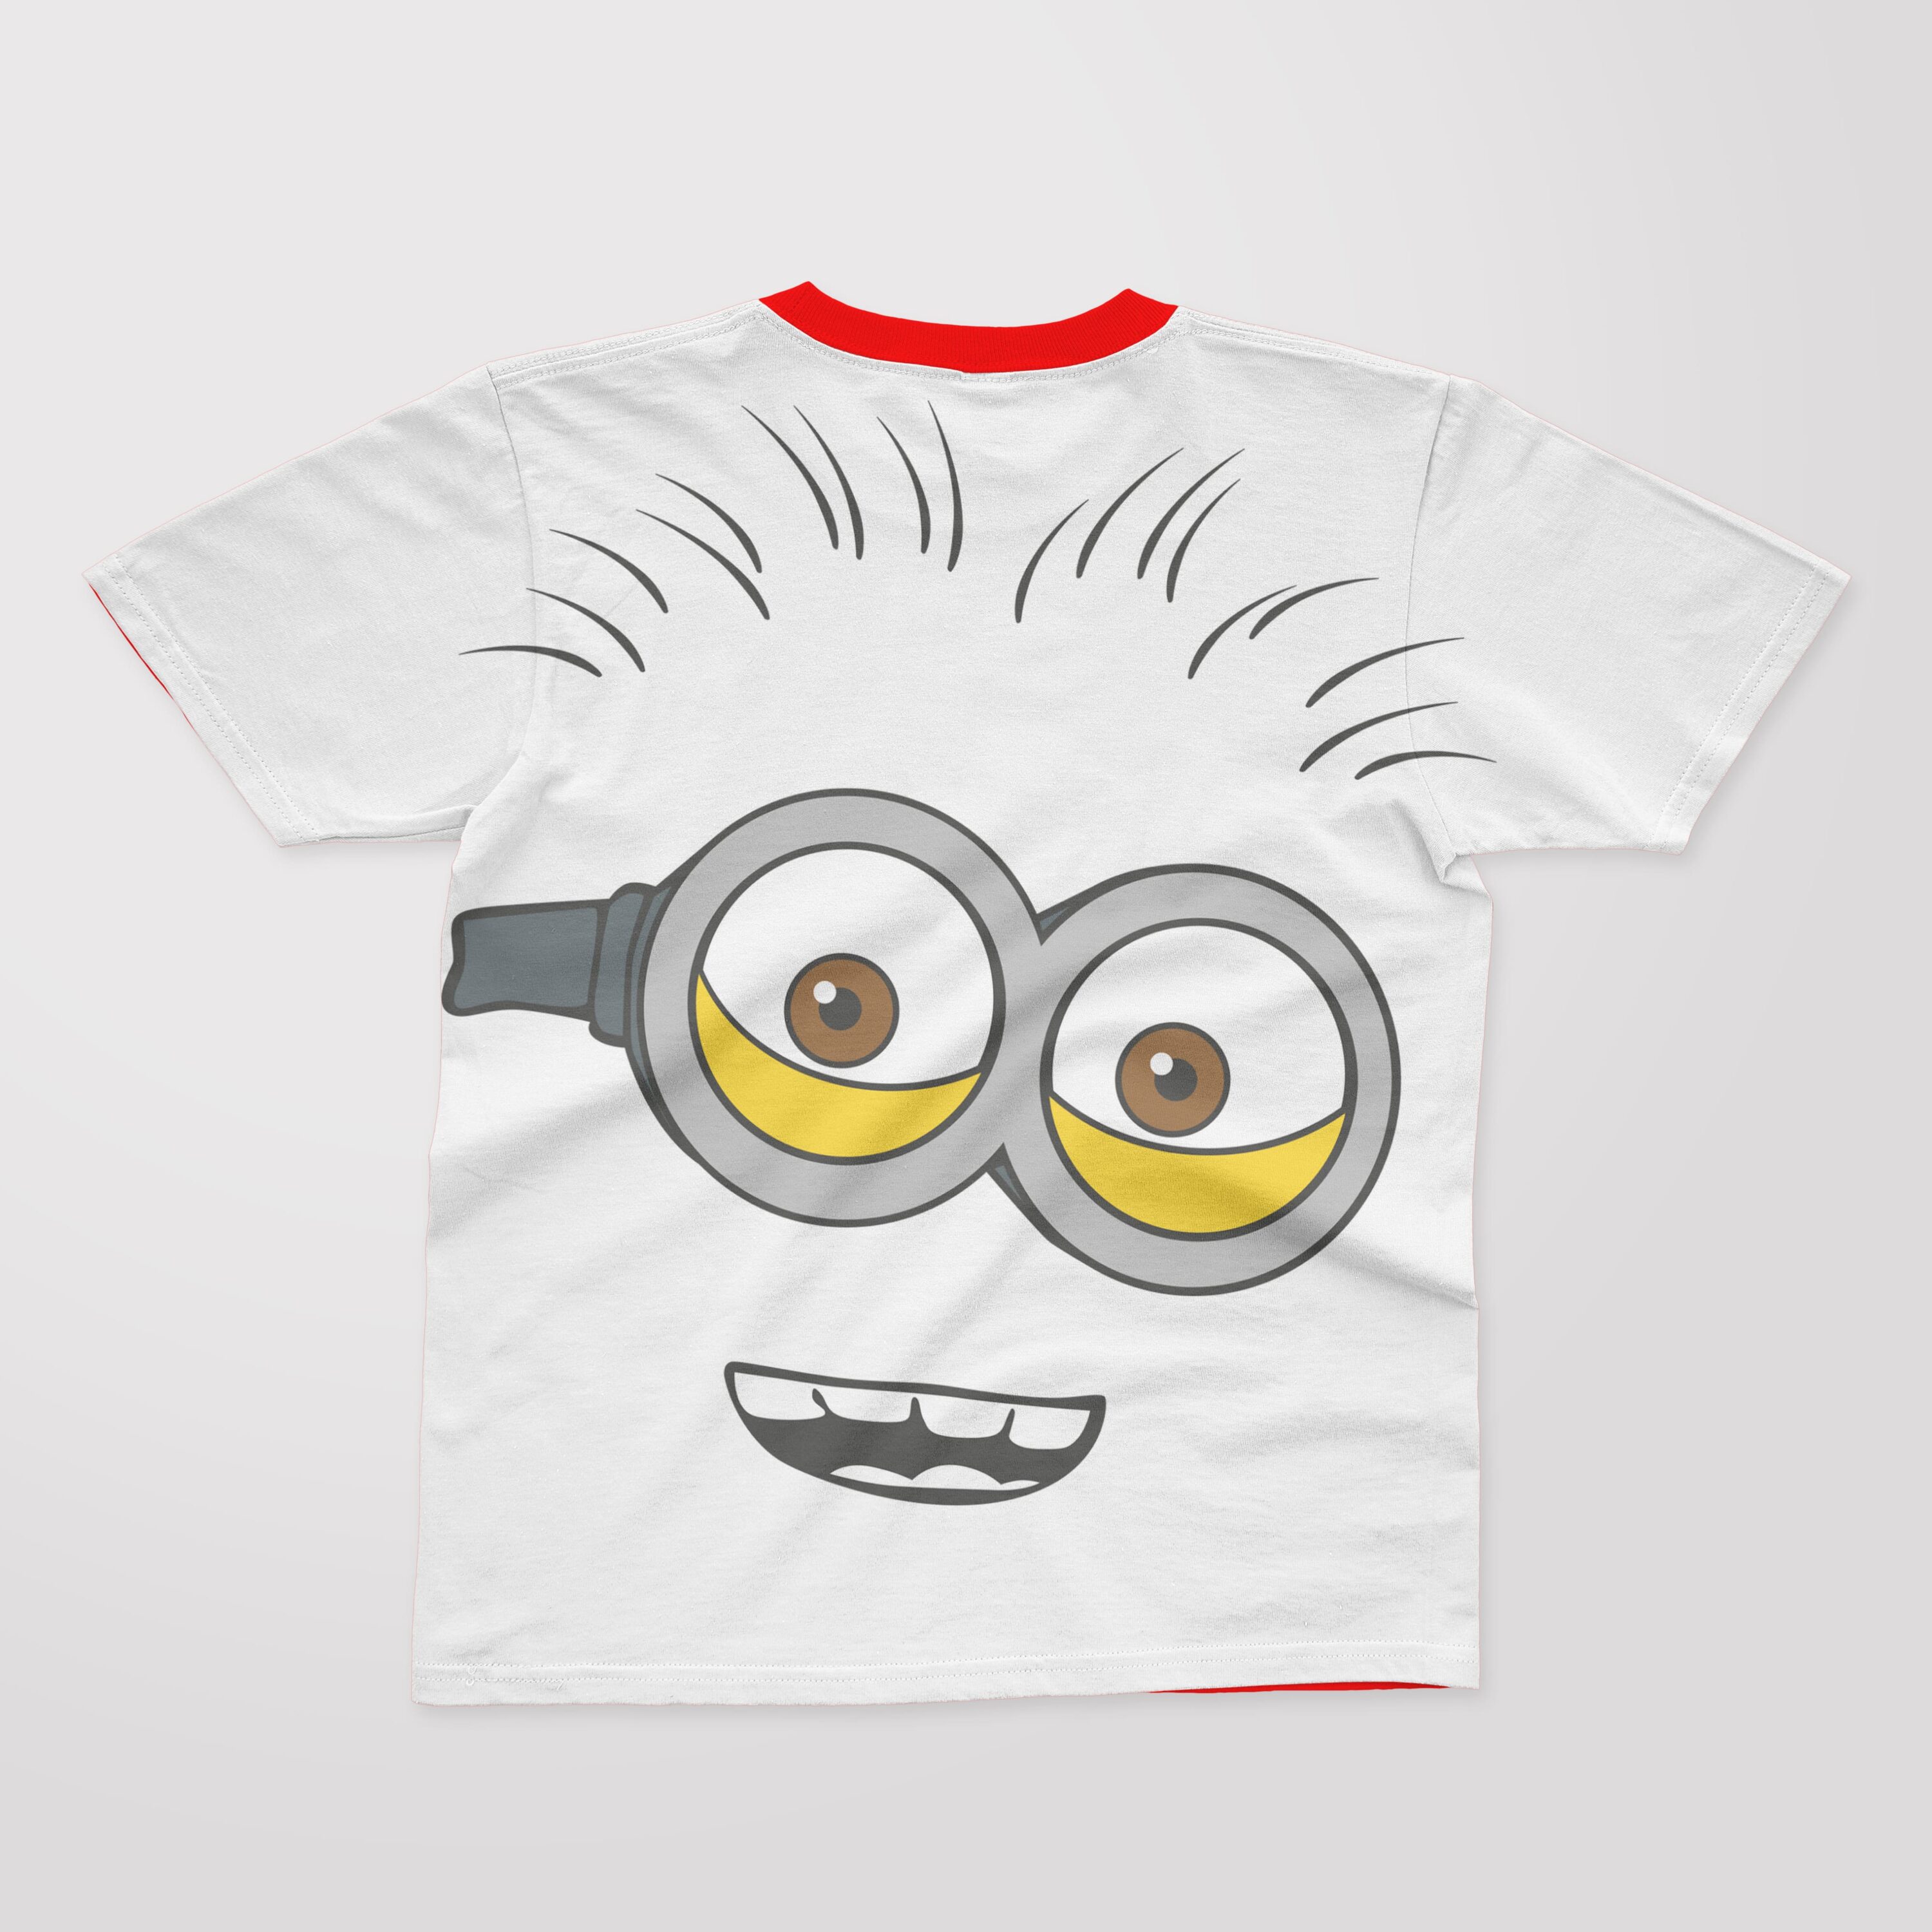 A white T-shirt with a red collar and a face of a laughing minion.